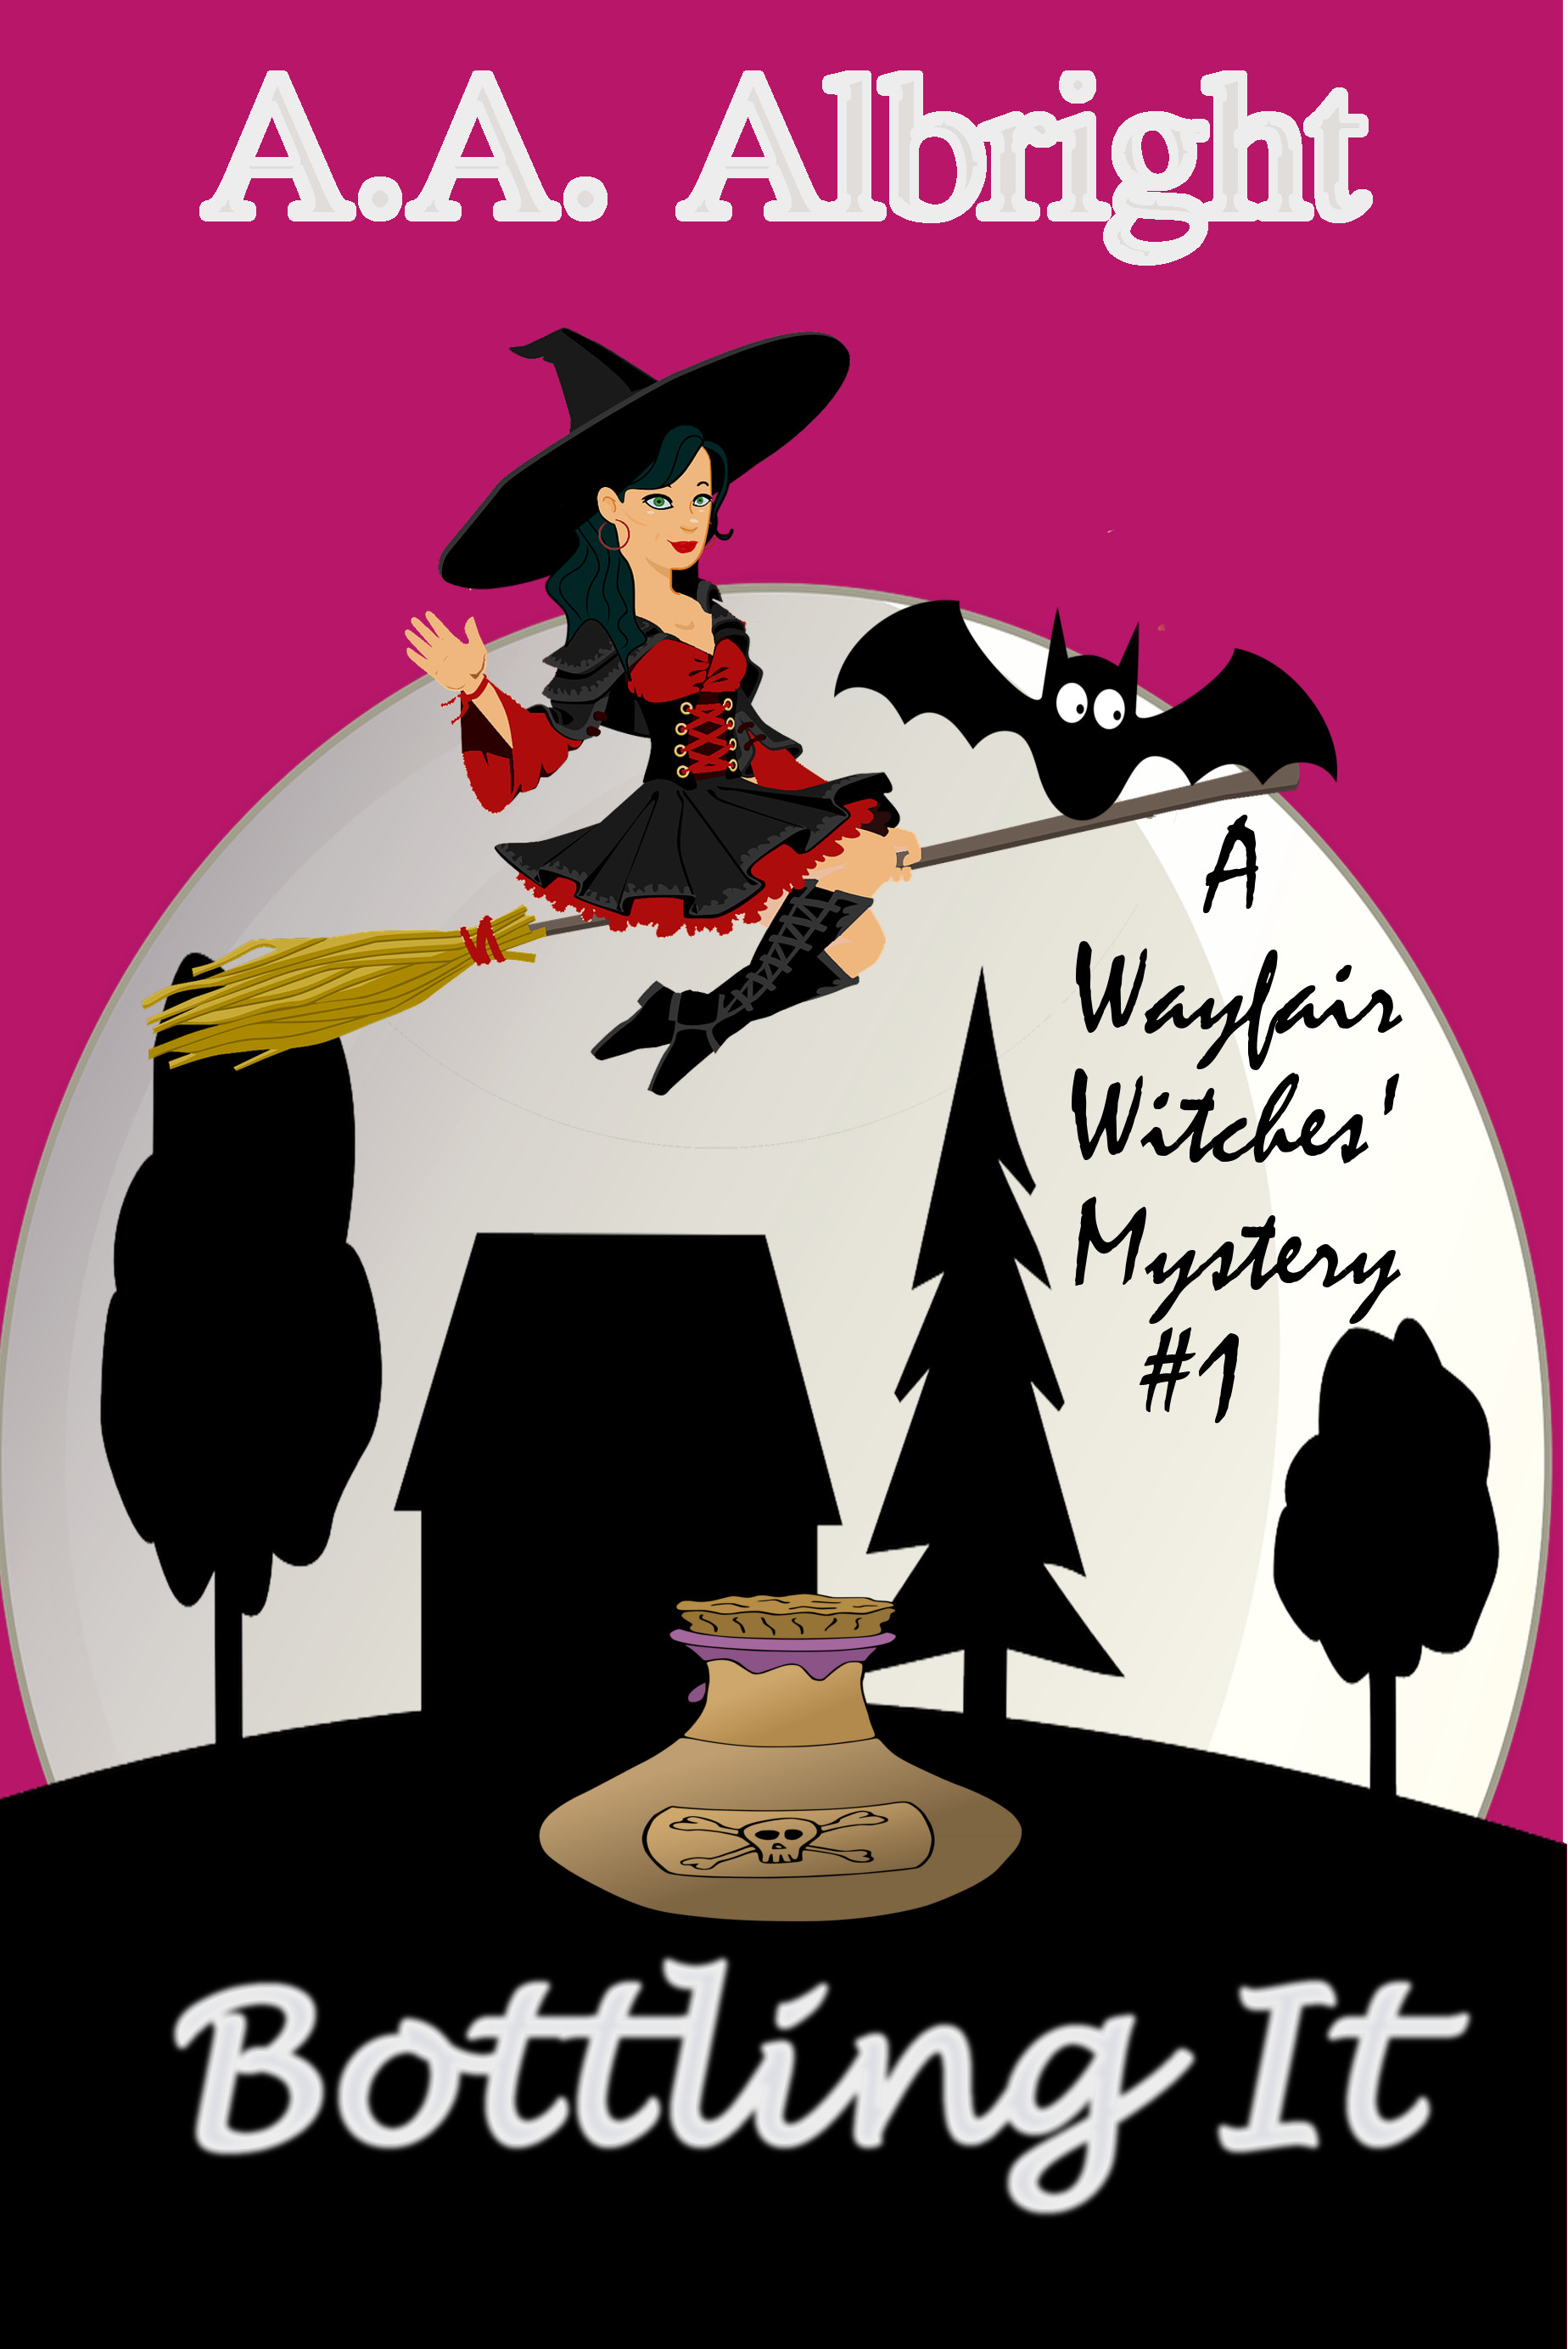 FREE: Bottling It (A Wayfair Witches’ Cozy Mystery #1) by A.A. Albright